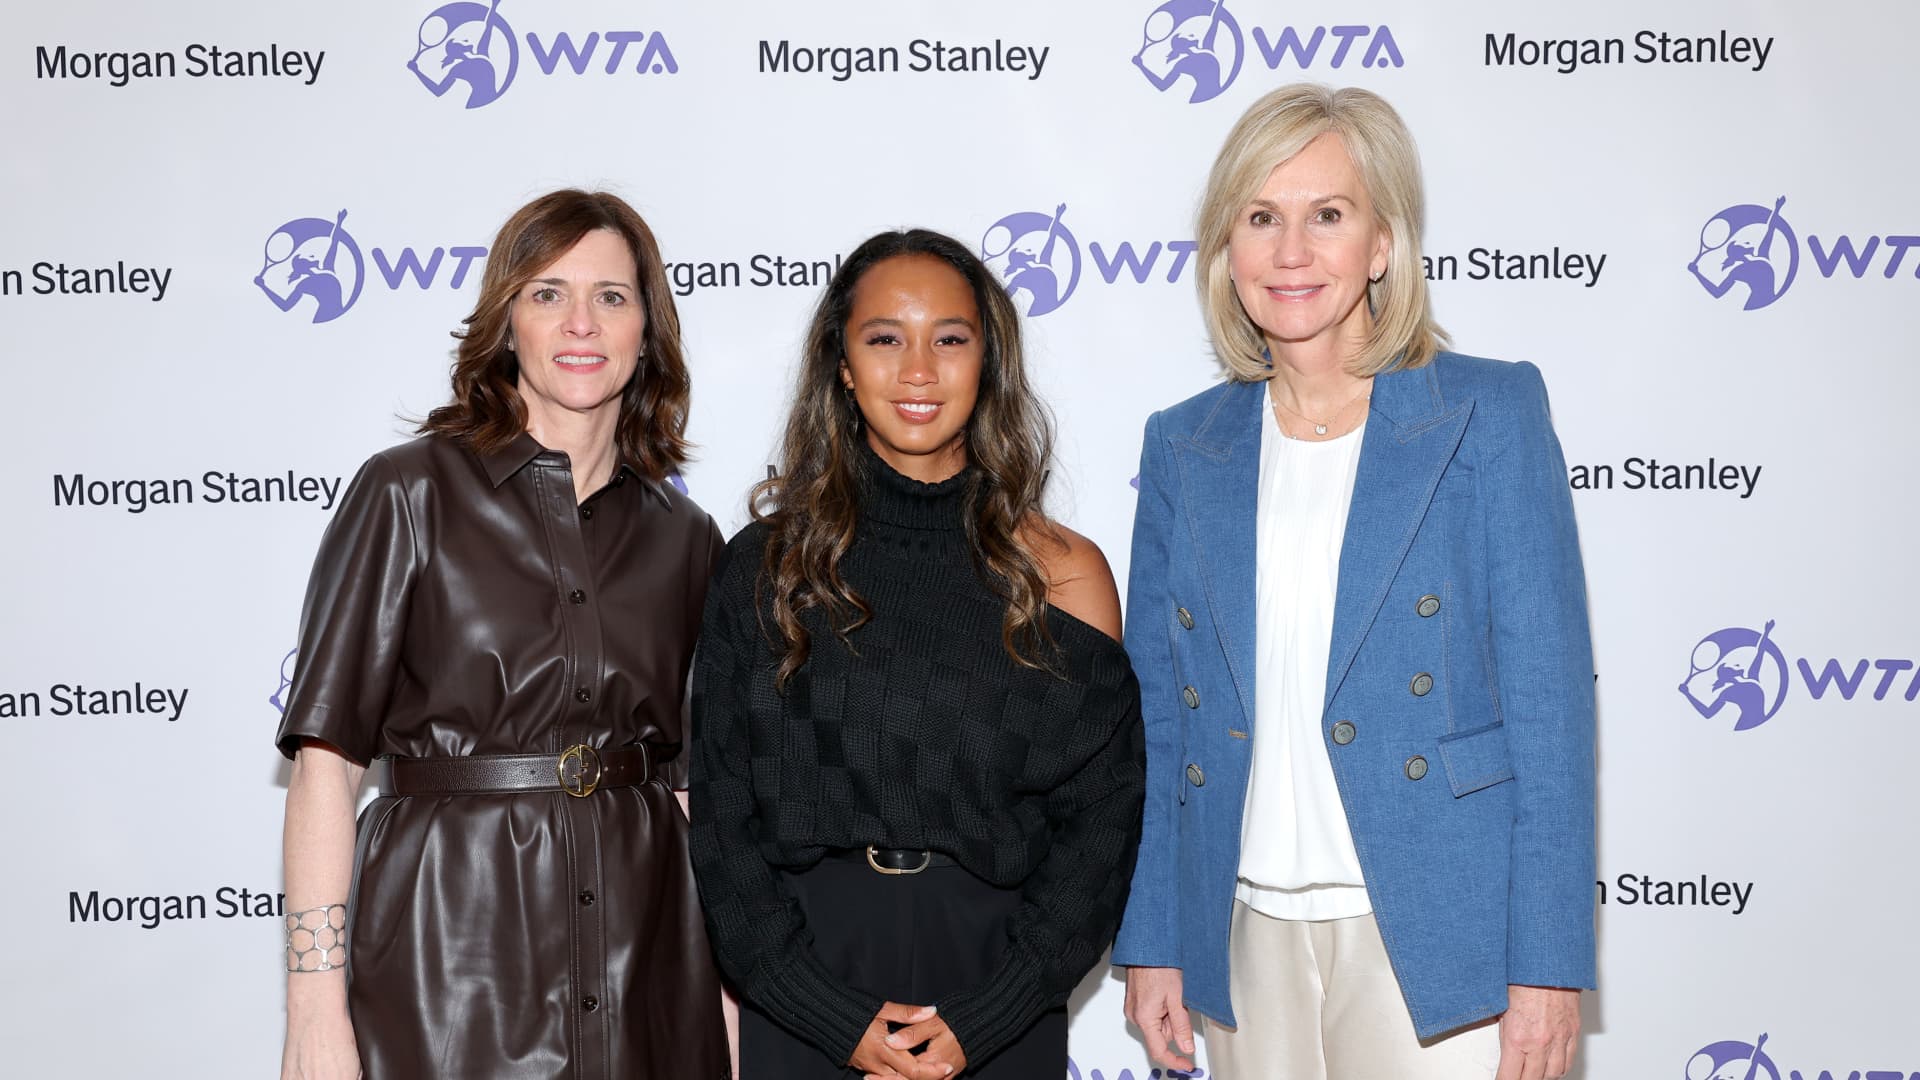 Alice Milligan, Leylah Annie Fernandez and Micky Lawler attend the Morgan Stanley x Women's Tennis Association Partnership Launch on March 01, 2023 in New York City.